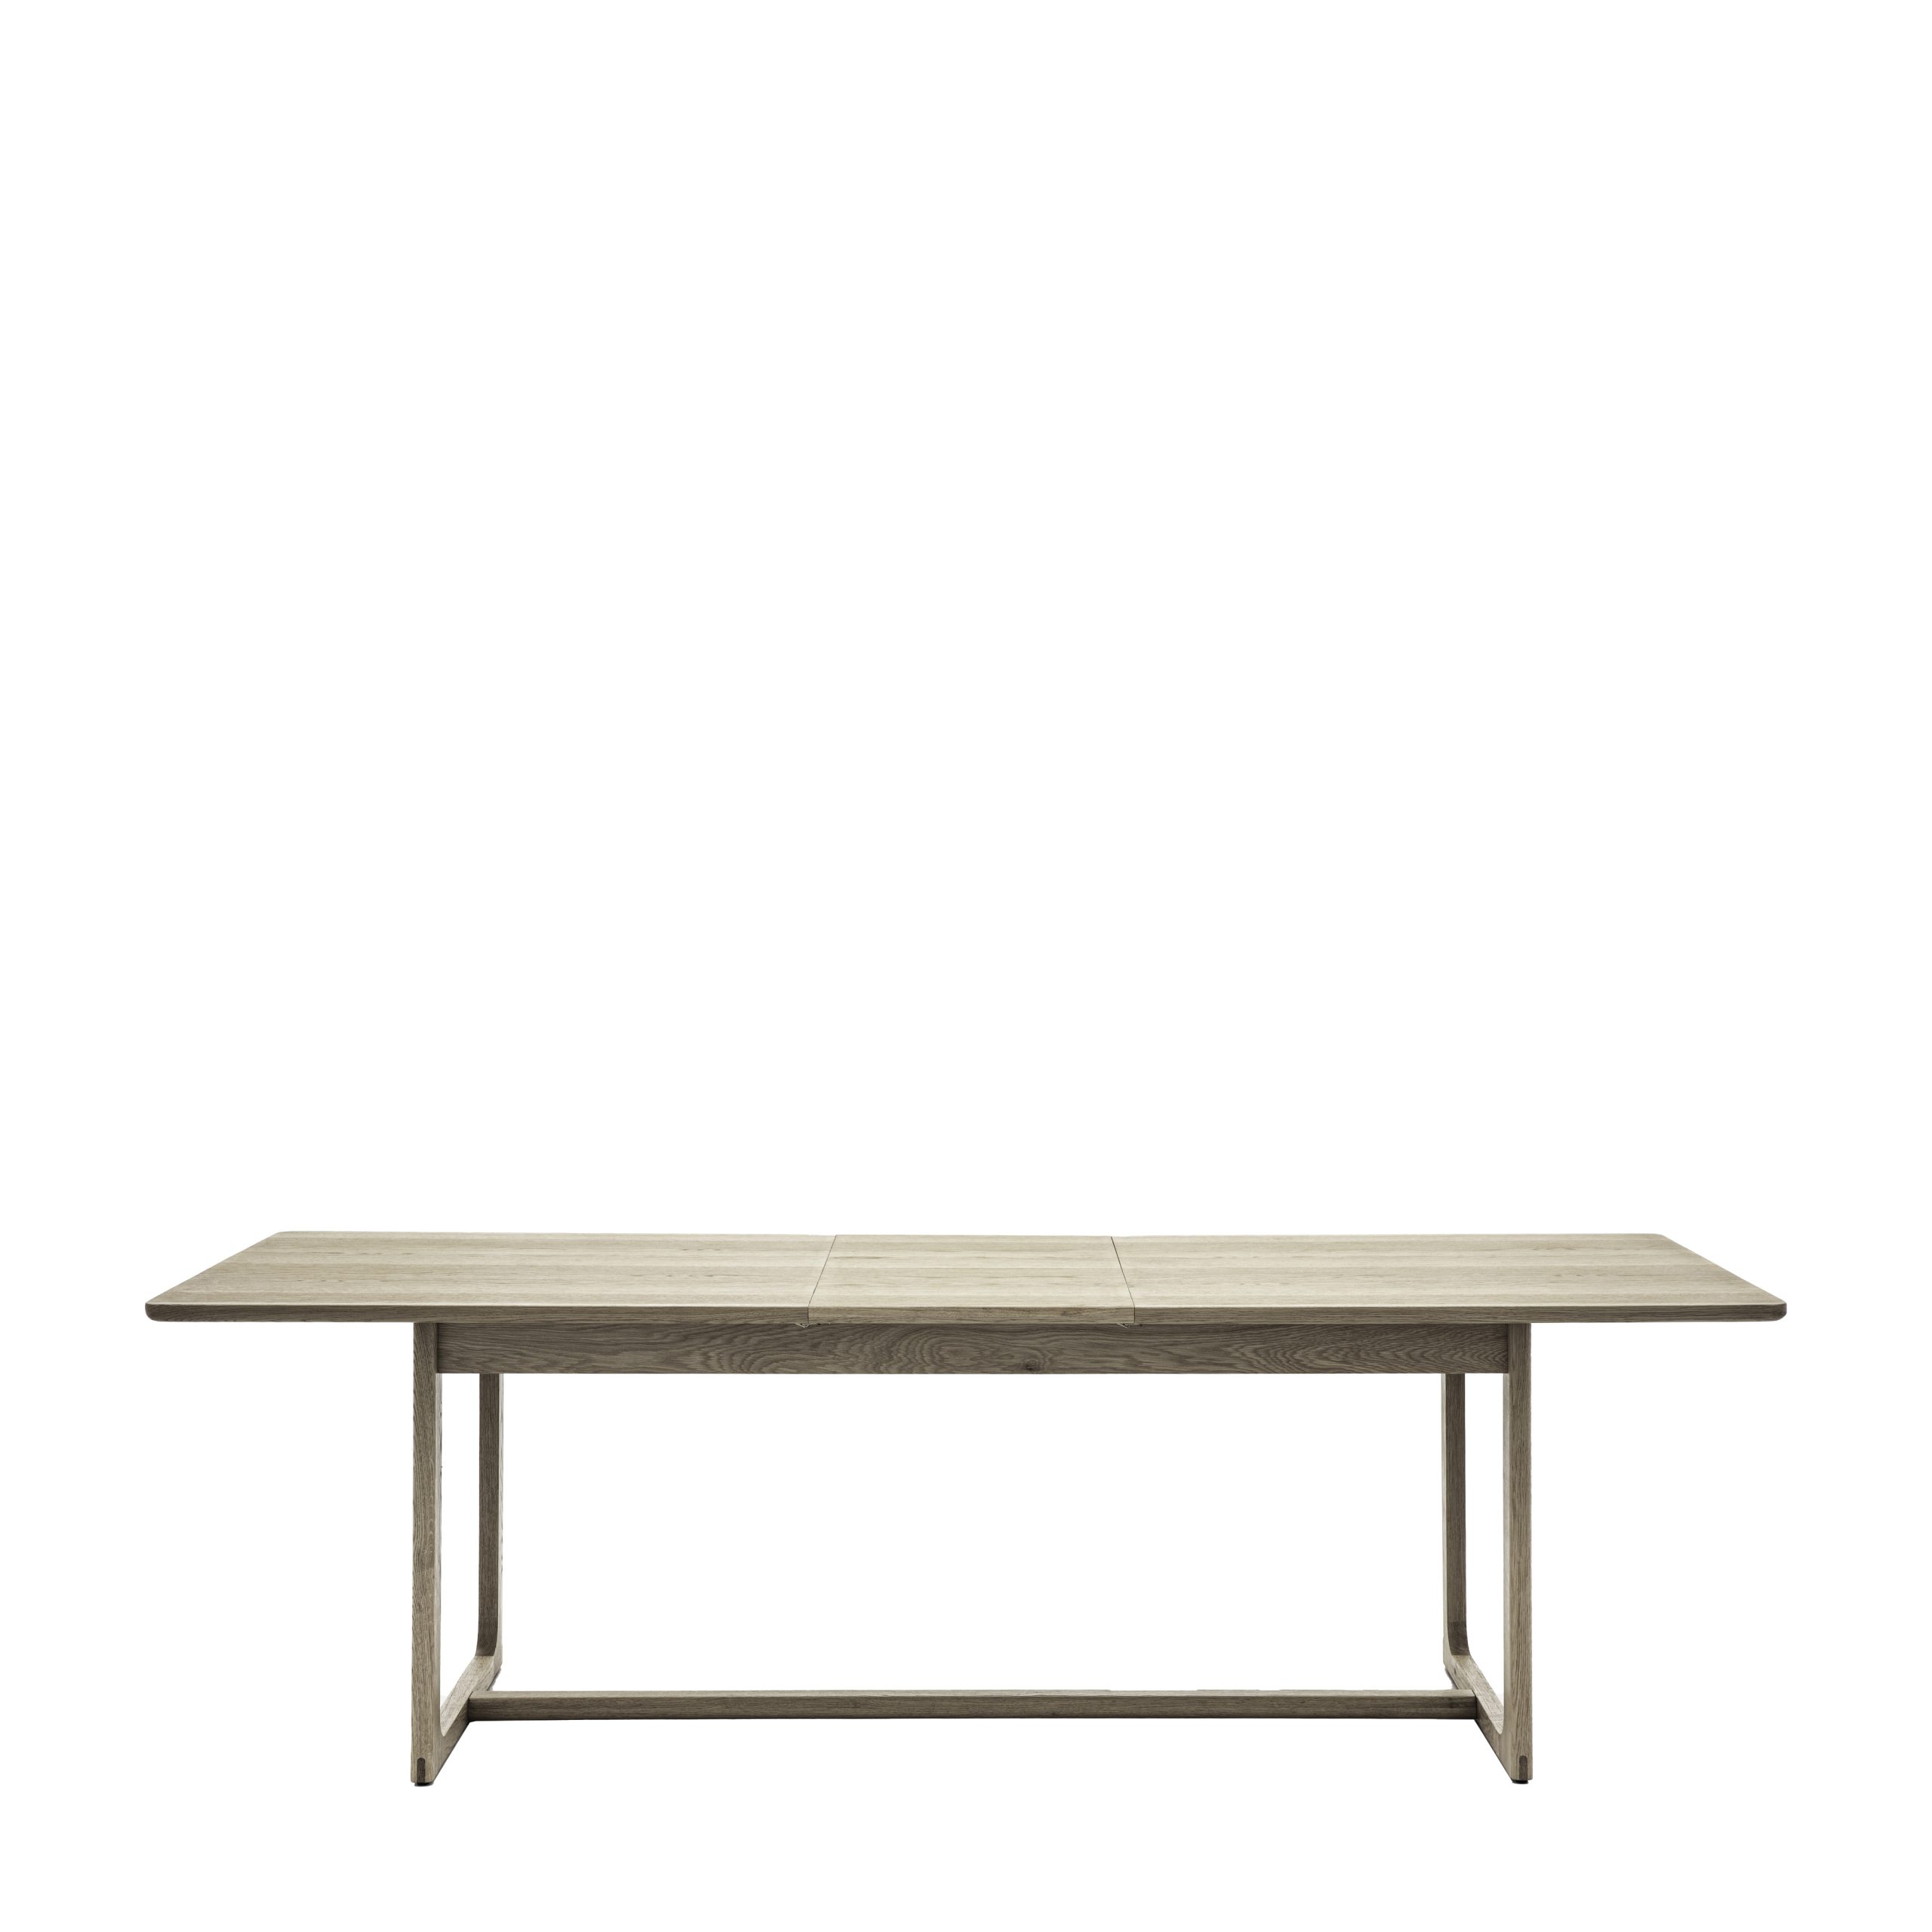 Gallery Direct Craft Extending Dining Table Smoked